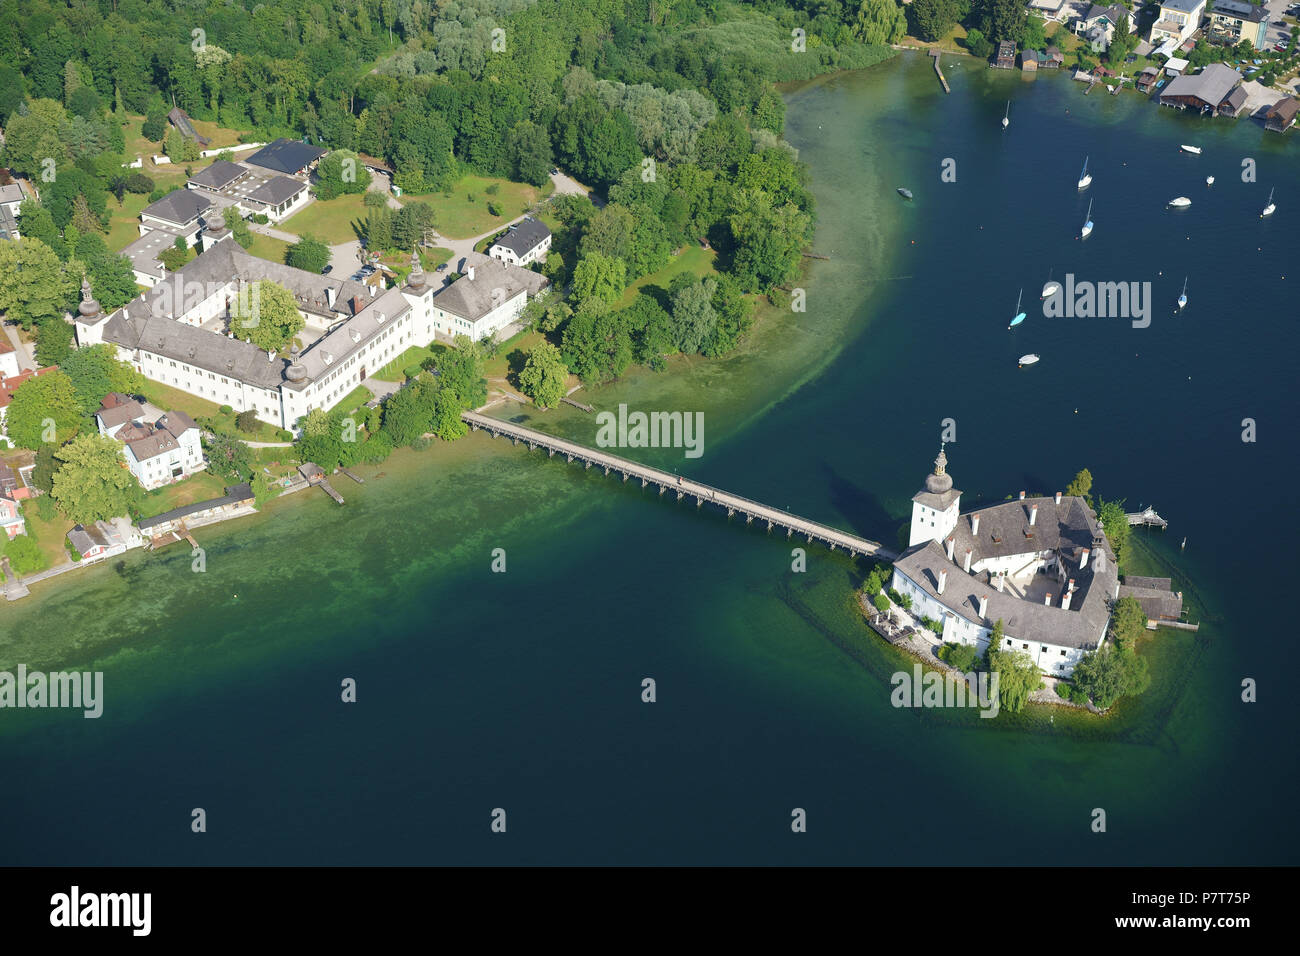 AERIAL VIEW. Medieval castle on a lake with a footbridge for access. Ort Castle, Gmunden, Traunsee (lake), Upper Austria, Austria. Stock Photo